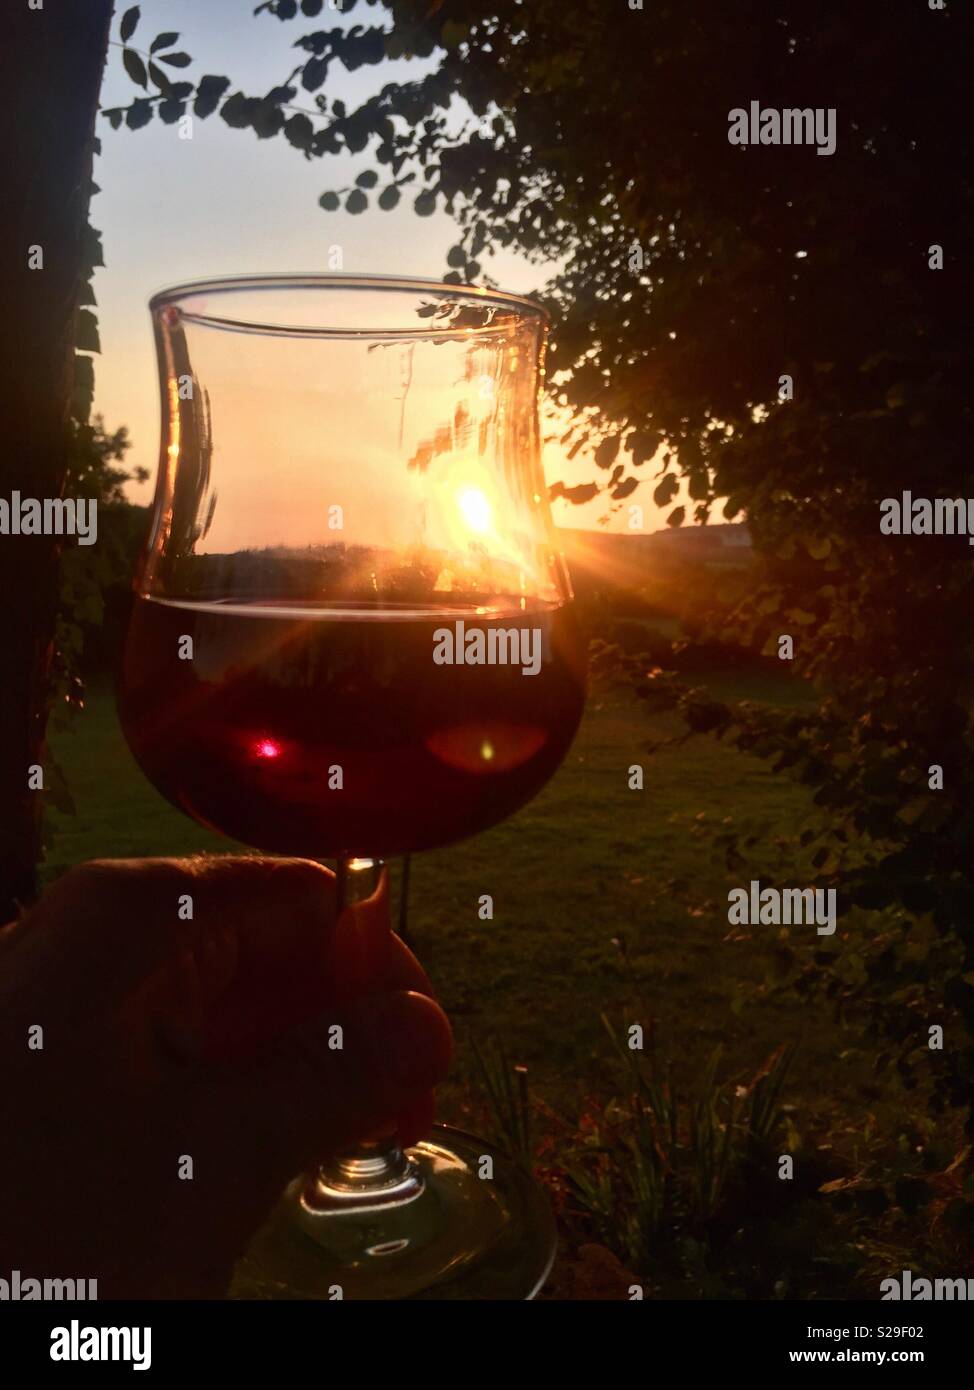 Sante! Enjoying a full bodied glass of red wine, back lit by the evening sunshine. Stock Photo